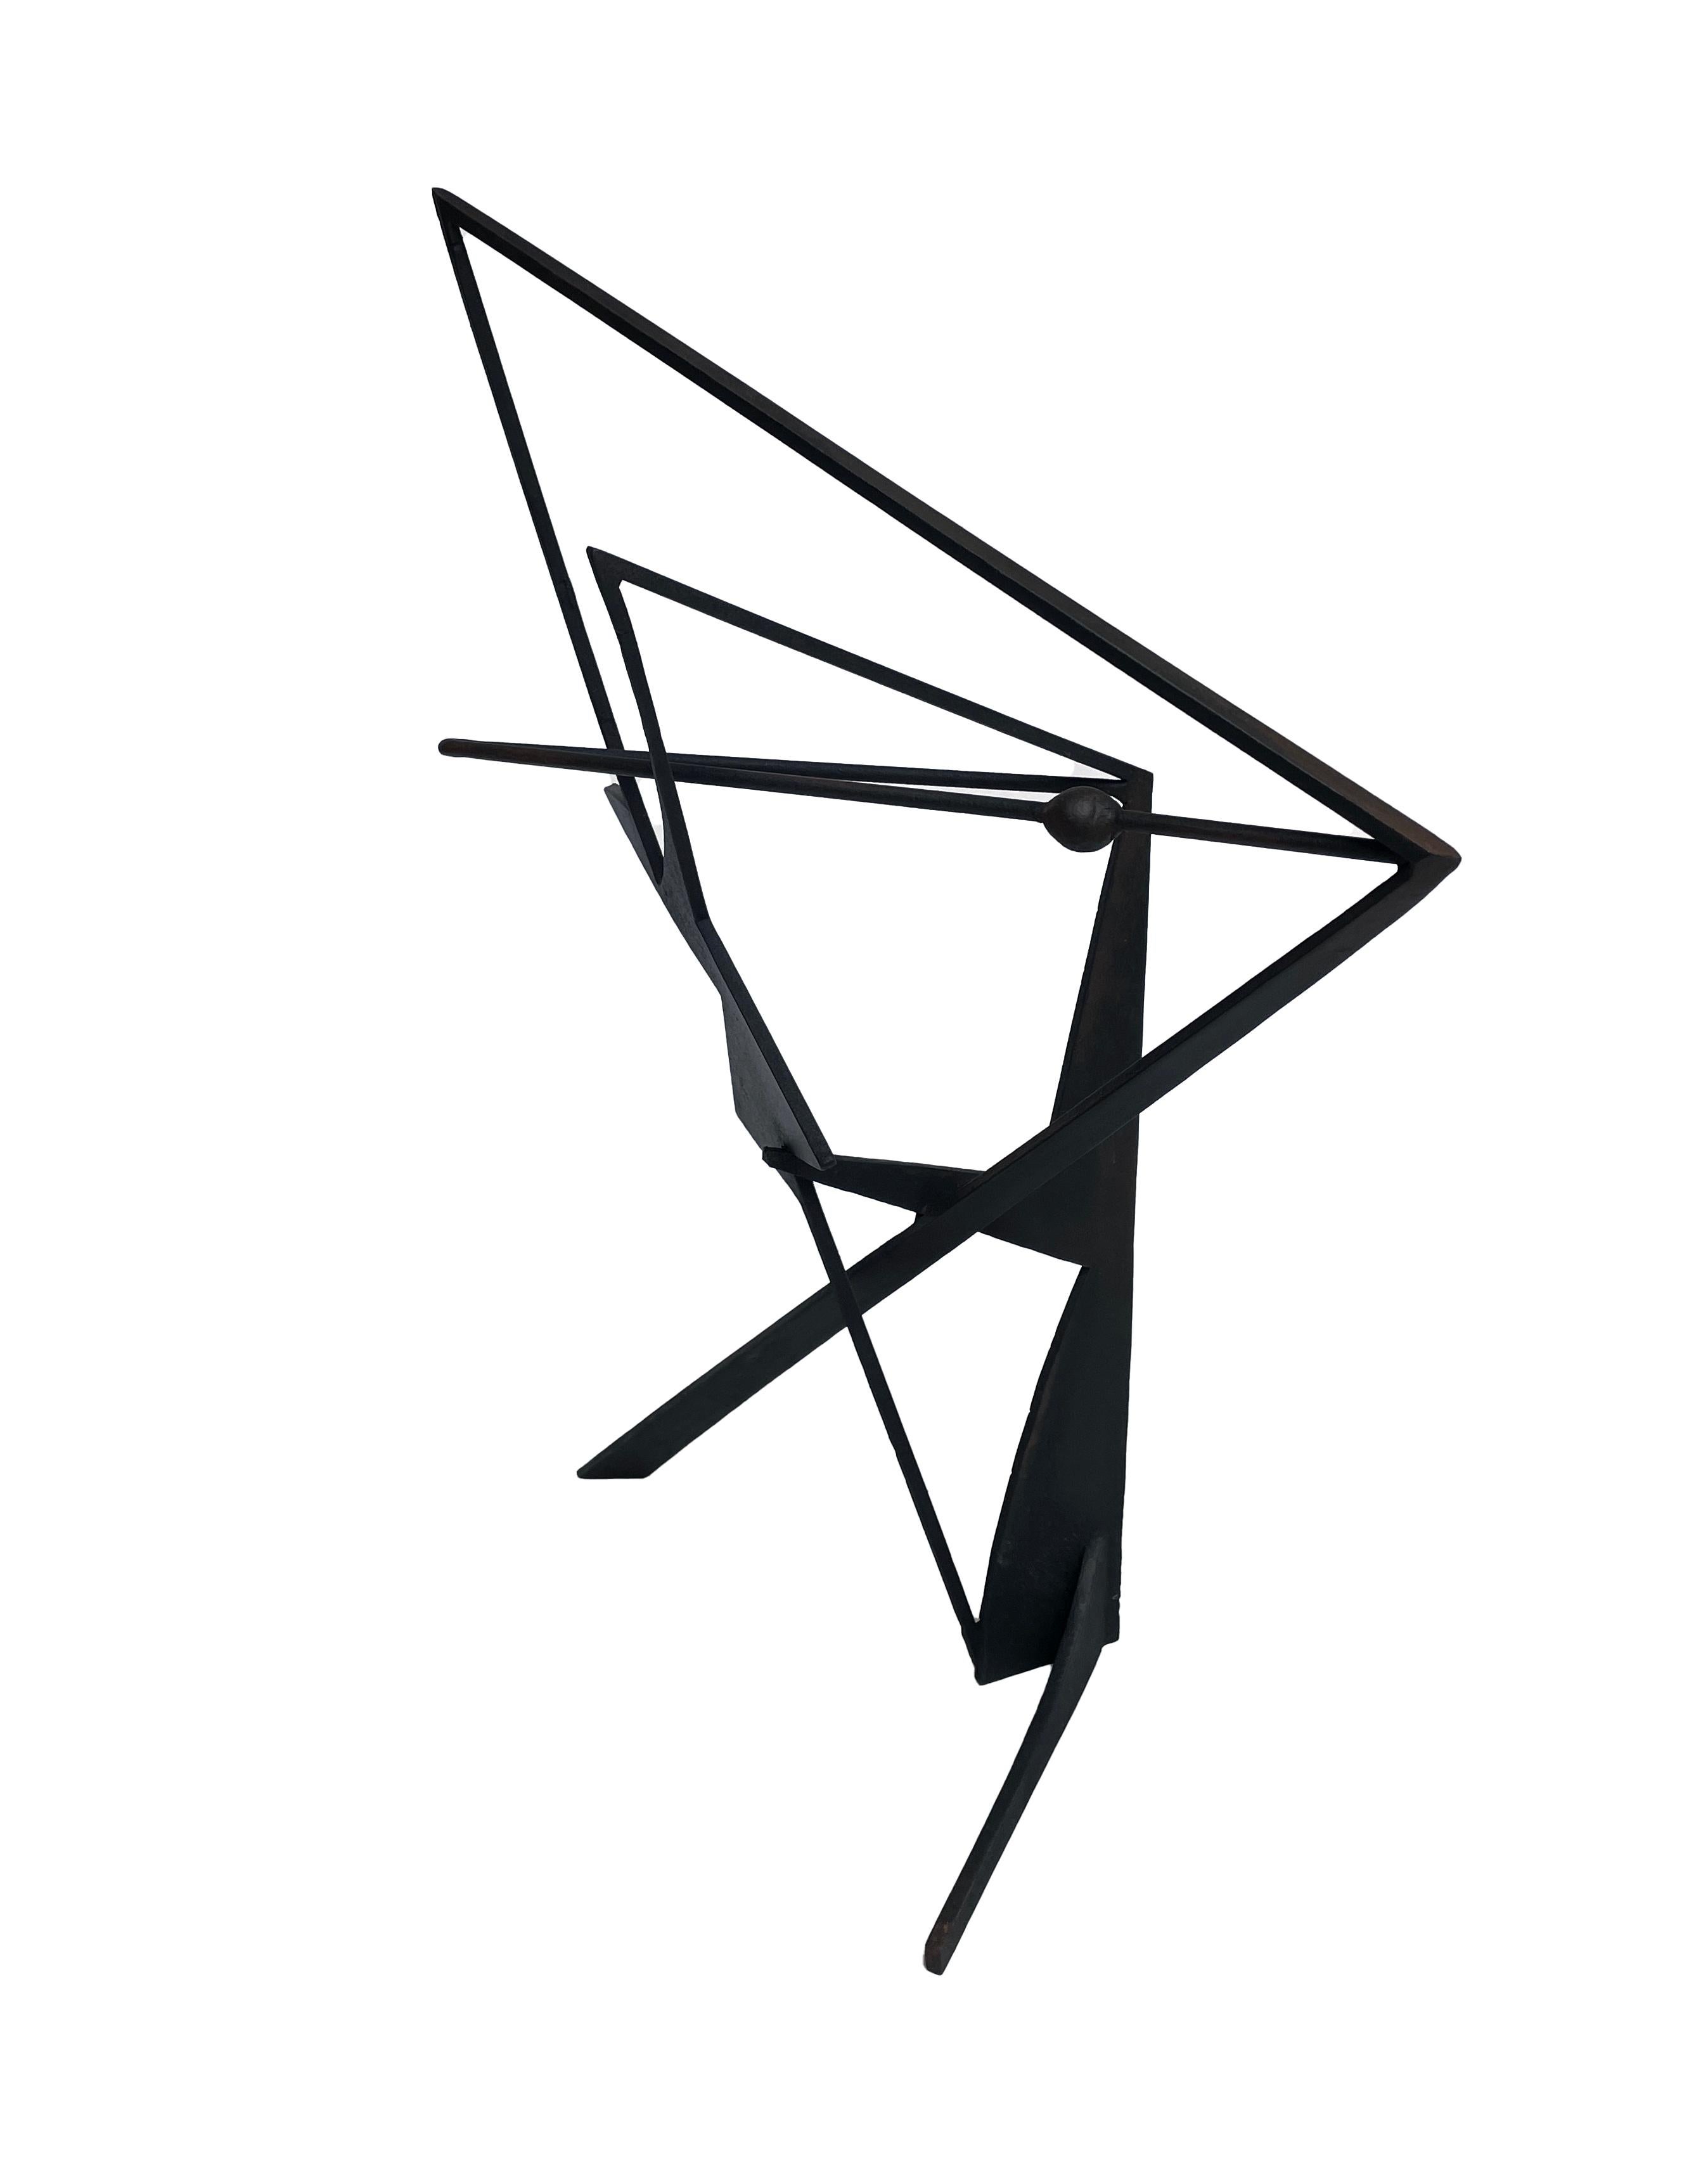 The Shortest Distance - Abstract Geometric Form, Welded Steel Sculpture  4